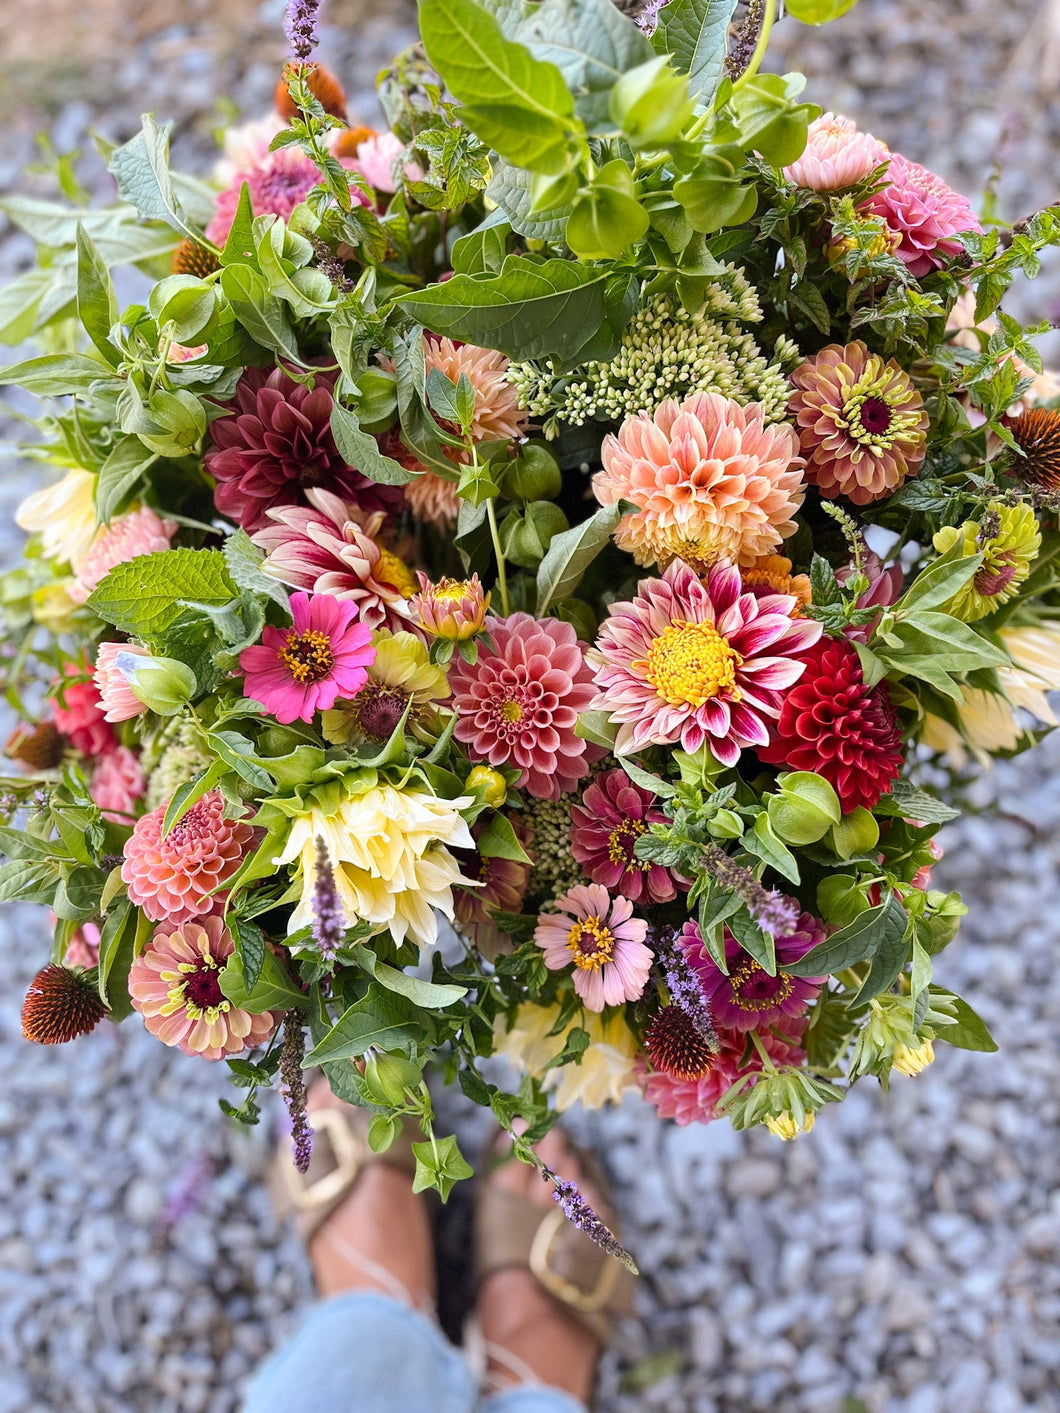 The Year of Flowers - Monthly Bouquets from April to September (Delivery to Abbotsford or Aldergrove)